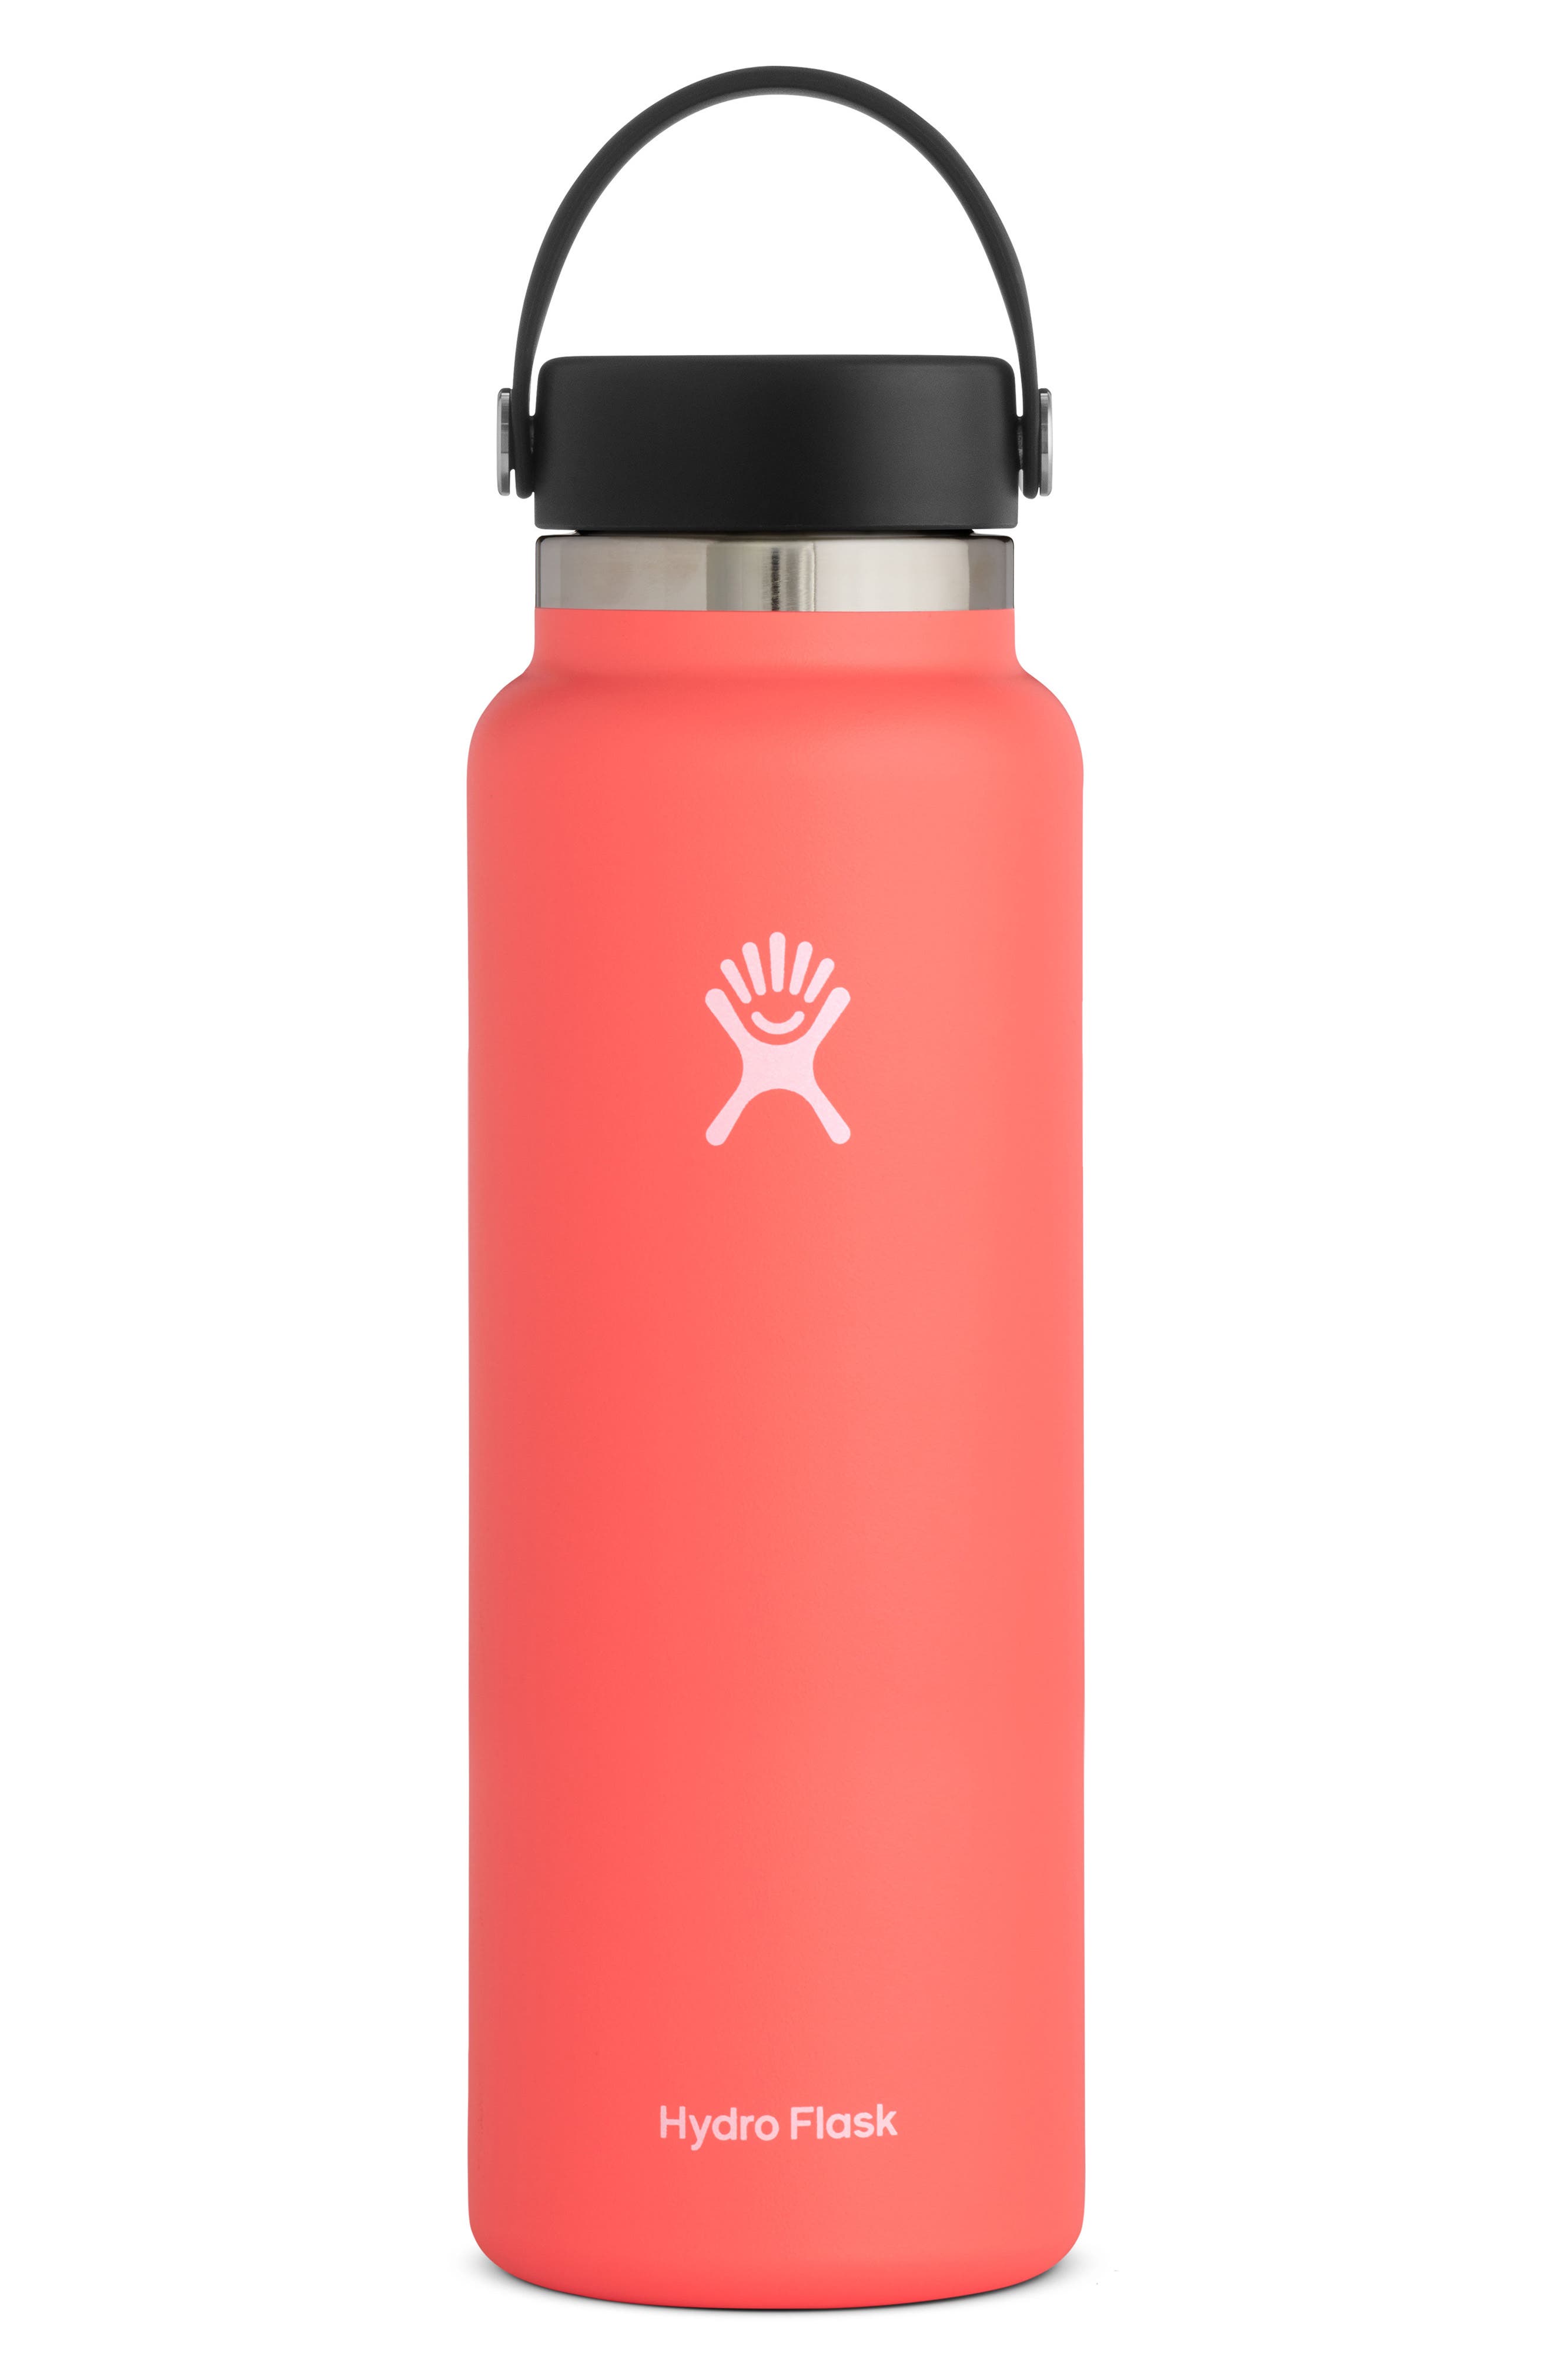 sprouts hydro flask